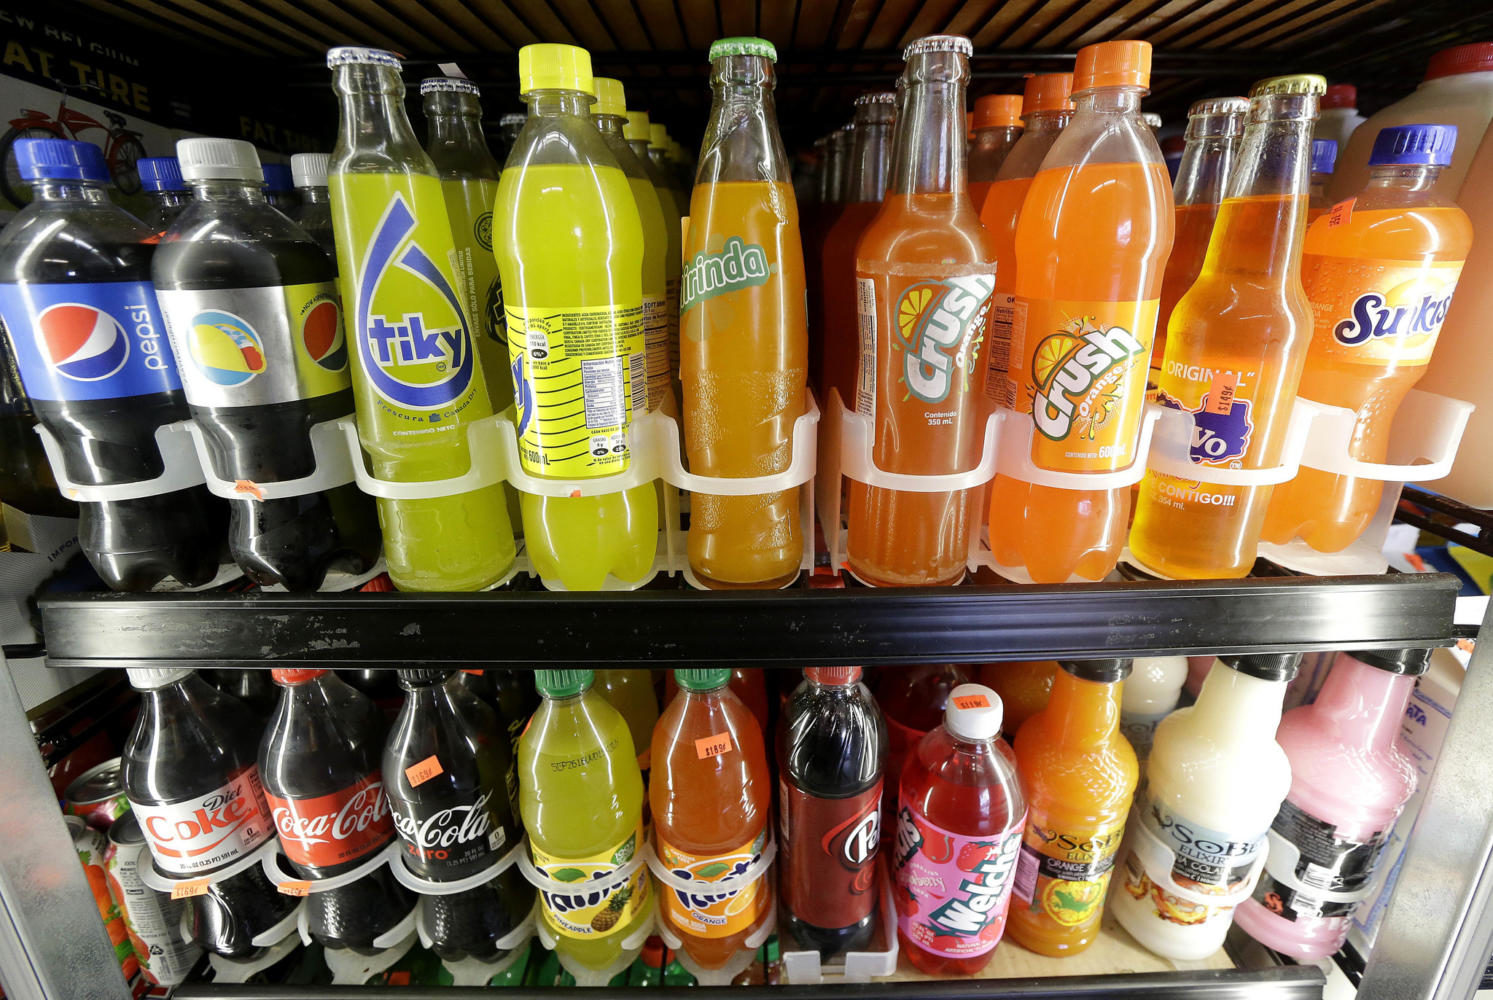 Soda tax provokes changes, confusion at local businesses